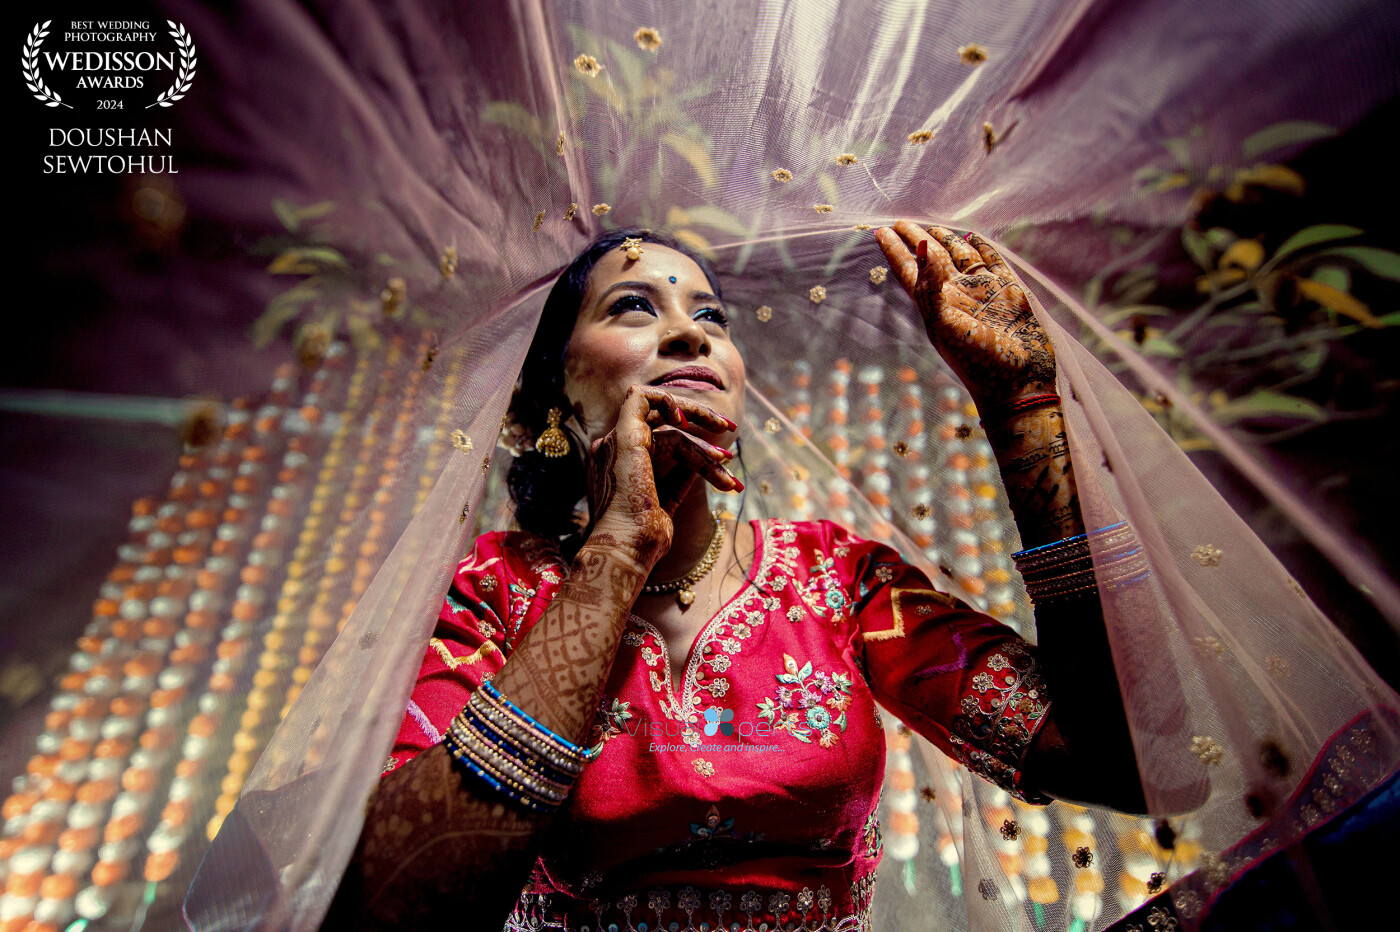 The rituals of Hindu weddings in Mauritius are so colourful  and enchanting. This picture was taken during the mehendi night when the background was not so inspiring though. However, being creative I was able to capture this sweet image of the beautiful bride. <br />
<br />
It was an amazing feeling when she saw the results.